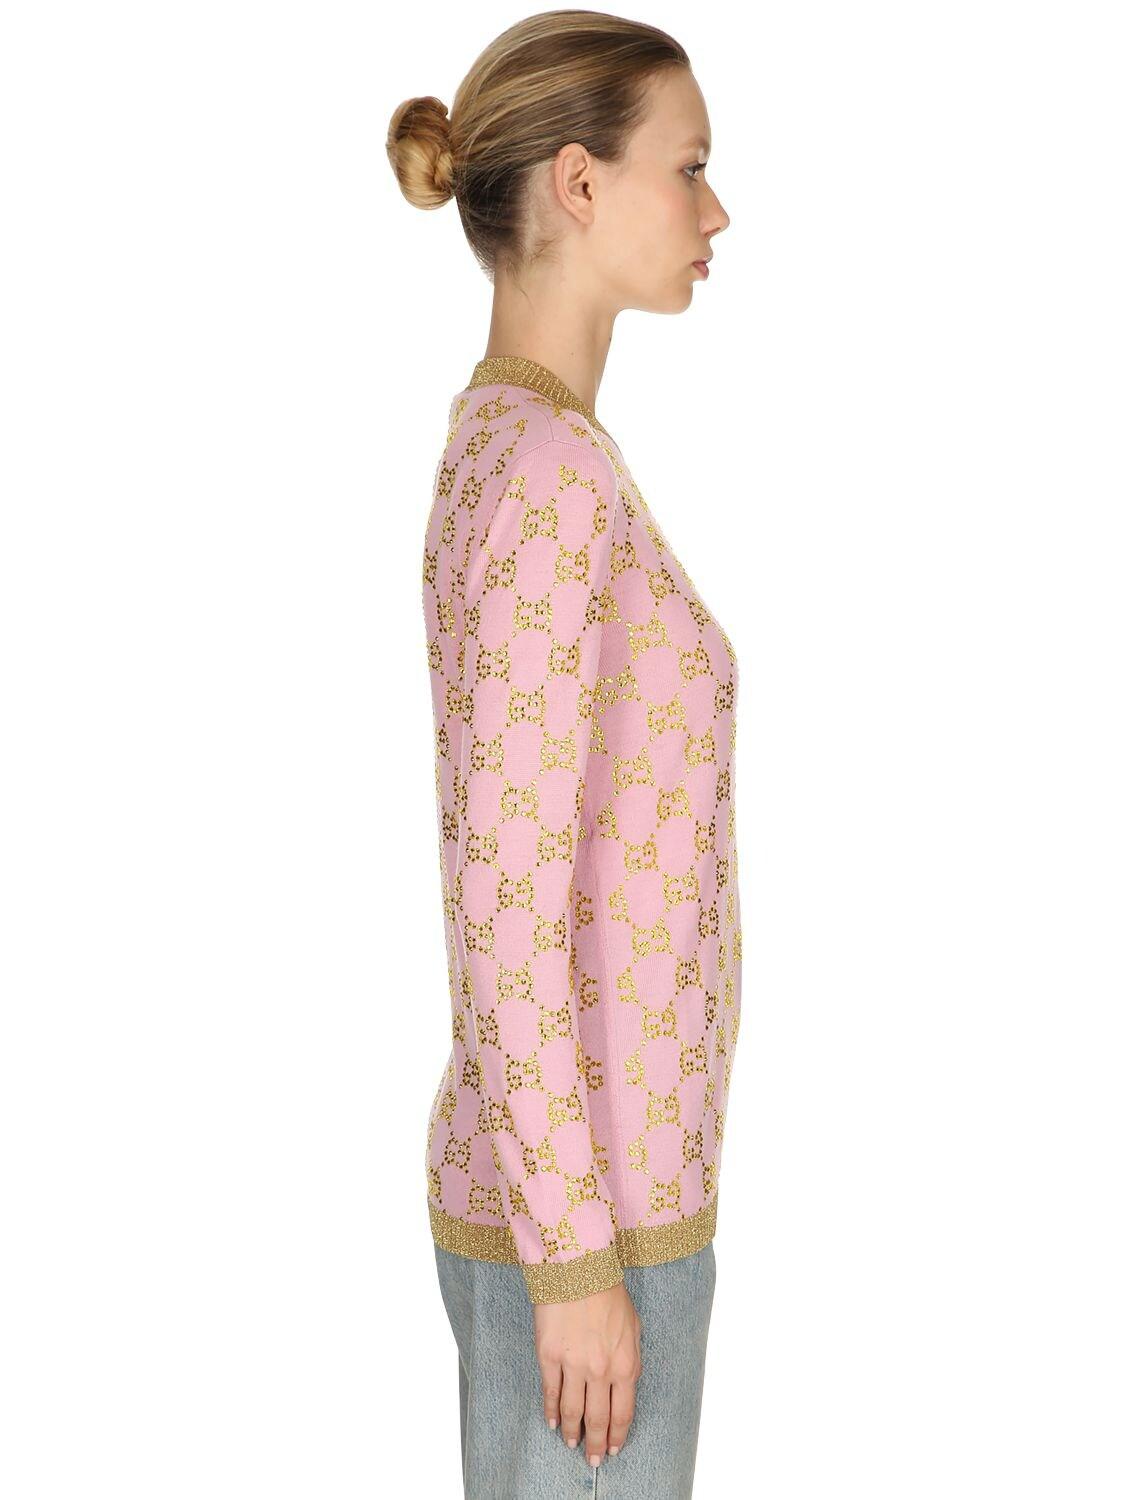 Gucci Gg Supreme Wool Jacquard Sweater in Pink/Gold (Pink) - Lyst